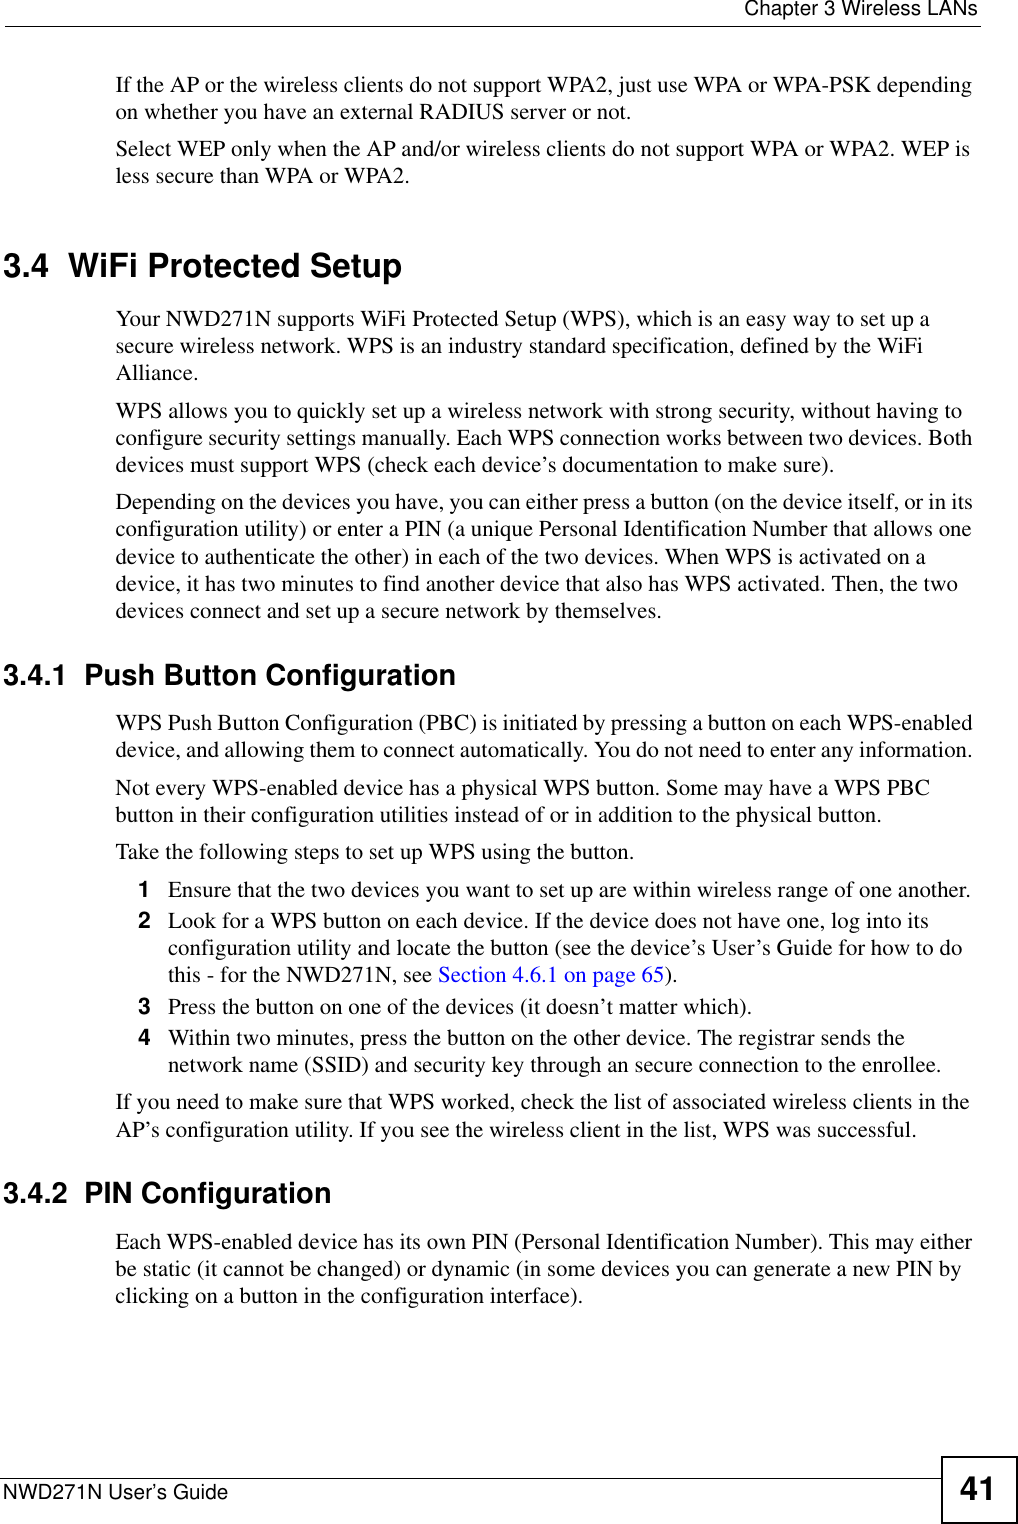  Chapter 3 Wireless LANsNWD271N User’s Guide 41If the AP or the wireless clients do not support WPA2, just use WPA or WPA-PSK depending on whether you have an external RADIUS server or not.Select WEP only when the AP and/or wireless clients do not support WPA or WPA2. WEP is less secure than WPA or WPA2.3.4  WiFi Protected SetupYour NWD271N supports WiFi Protected Setup (WPS), which is an easy way to set up a secure wireless network. WPS is an industry standard specification, defined by the WiFi Alliance.WPS allows you to quickly set up a wireless network with strong security, without having to configure security settings manually. Each WPS connection works between two devices. Both devices must support WPS (check each device’s documentation to make sure). Depending on the devices you have, you can either press a button (on the device itself, or in its configuration utility) or enter a PIN (a unique Personal Identification Number that allows one device to authenticate the other) in each of the two devices. When WPS is activated on a device, it has two minutes to find another device that also has WPS activated. Then, the two devices connect and set up a secure network by themselves.3.4.1  Push Button ConfigurationWPS Push Button Configuration (PBC) is initiated by pressing a button on each WPS-enabled device, and allowing them to connect automatically. You do not need to enter any information. Not every WPS-enabled device has a physical WPS button. Some may have a WPS PBC button in their configuration utilities instead of or in addition to the physical button.Take the following steps to set up WPS using the button.1Ensure that the two devices you want to set up are within wireless range of one another. 2Look for a WPS button on each device. If the device does not have one, log into its configuration utility and locate the button (see the device’s User’s Guide for how to do this - for the NWD271N, see Section 4.6.1 on page 65).3Press the button on one of the devices (it doesn’t matter which).4Within two minutes, press the button on the other device. The registrar sends the network name (SSID) and security key through an secure connection to the enrollee.If you need to make sure that WPS worked, check the list of associated wireless clients in the AP’s configuration utility. If you see the wireless client in the list, WPS was successful.3.4.2  PIN ConfigurationEach WPS-enabled device has its own PIN (Personal Identification Number). This may either be static (it cannot be changed) or dynamic (in some devices you can generate a new PIN by clicking on a button in the configuration interface). 